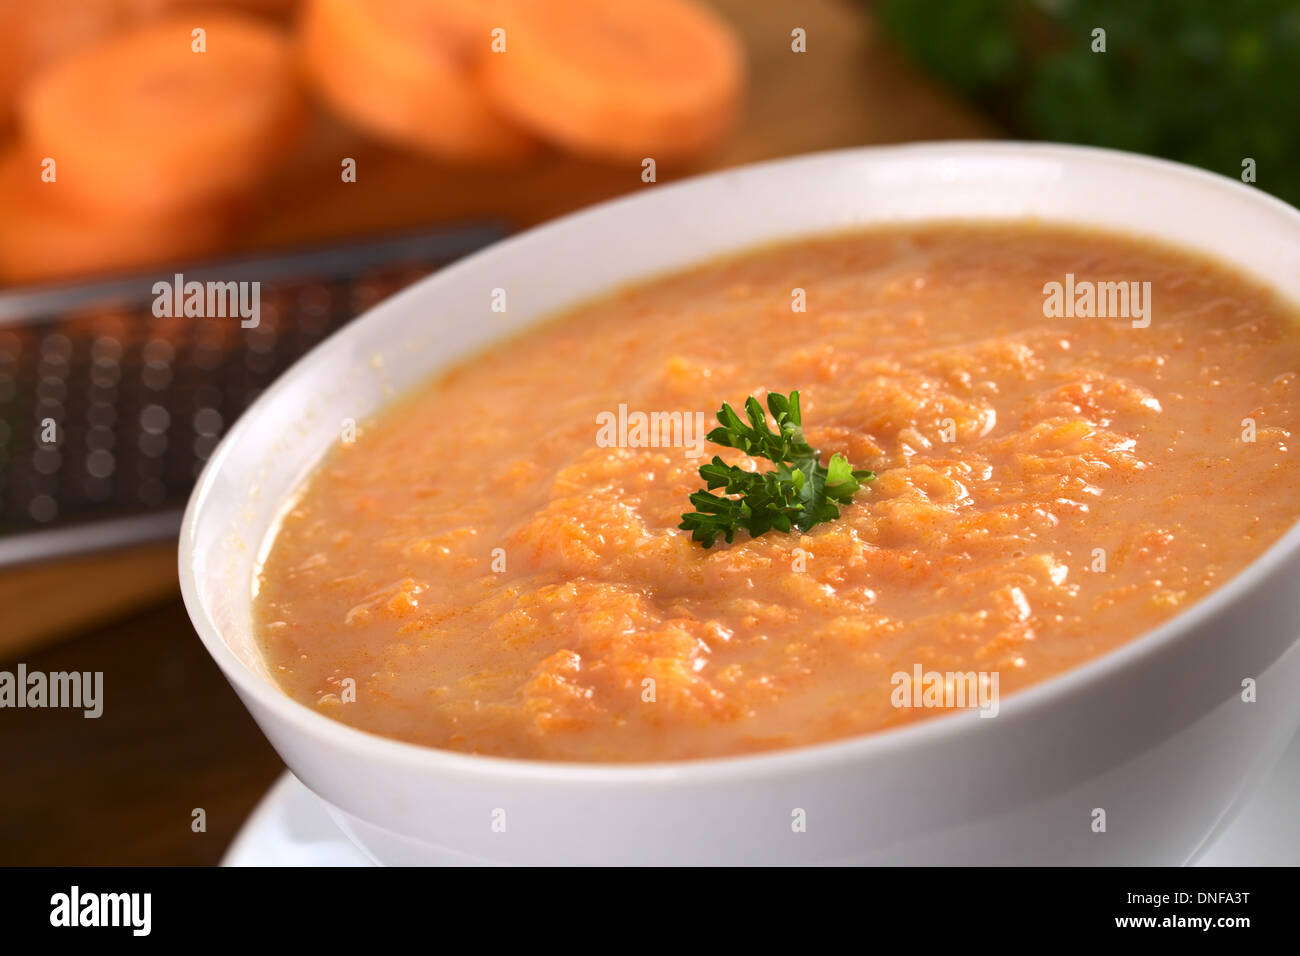 Carrot cream soup made of grated carrots and garnished with a parsley leaf (Selective Focus, Focus on the parsley leaf) Stock Photo